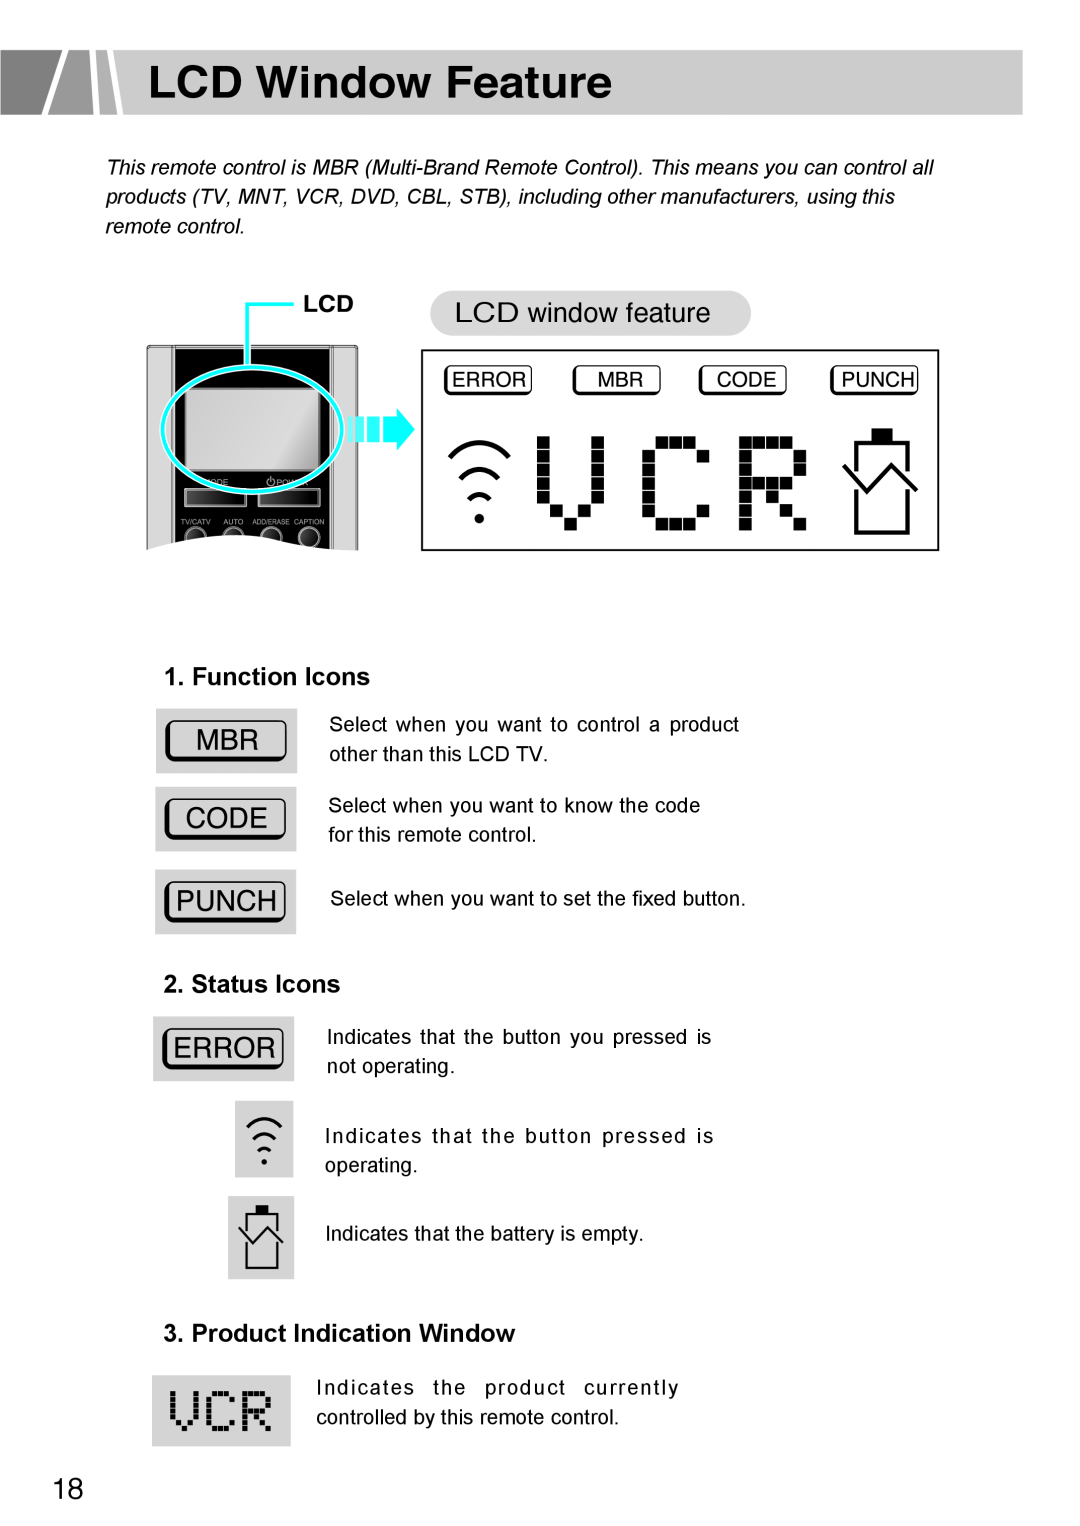 Humax L3040 owner manual LCD Window Feature, Function Icons, Status Icons, Product Indication Window, LCD window feature 